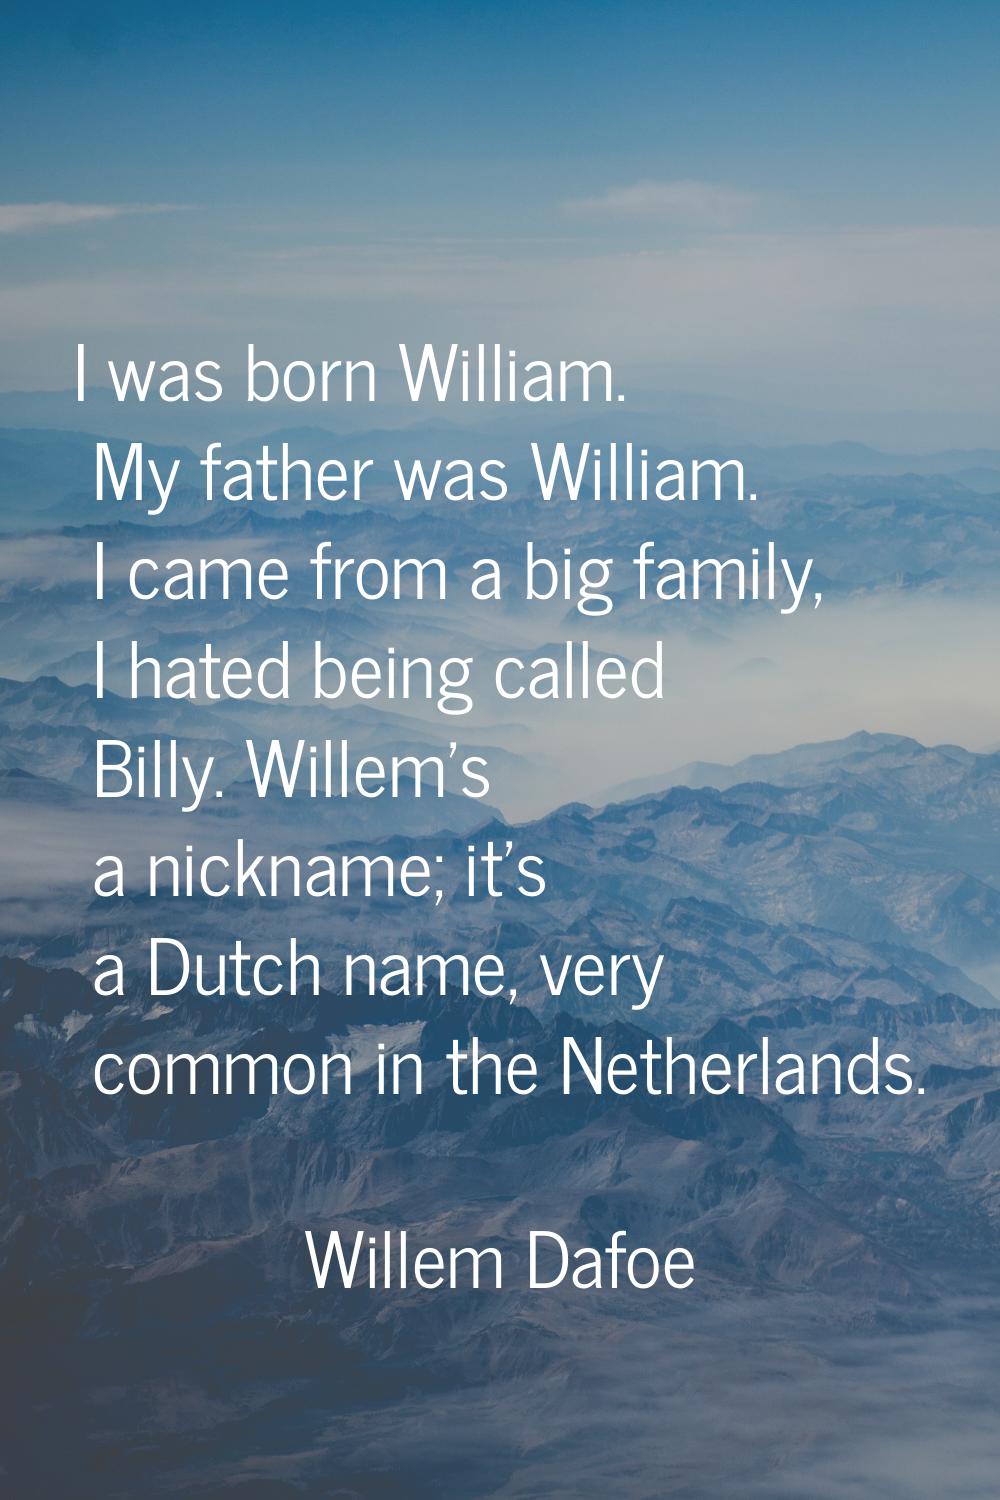 I was born William. My father was William. I came from a big family, I hated being called Billy. Wi